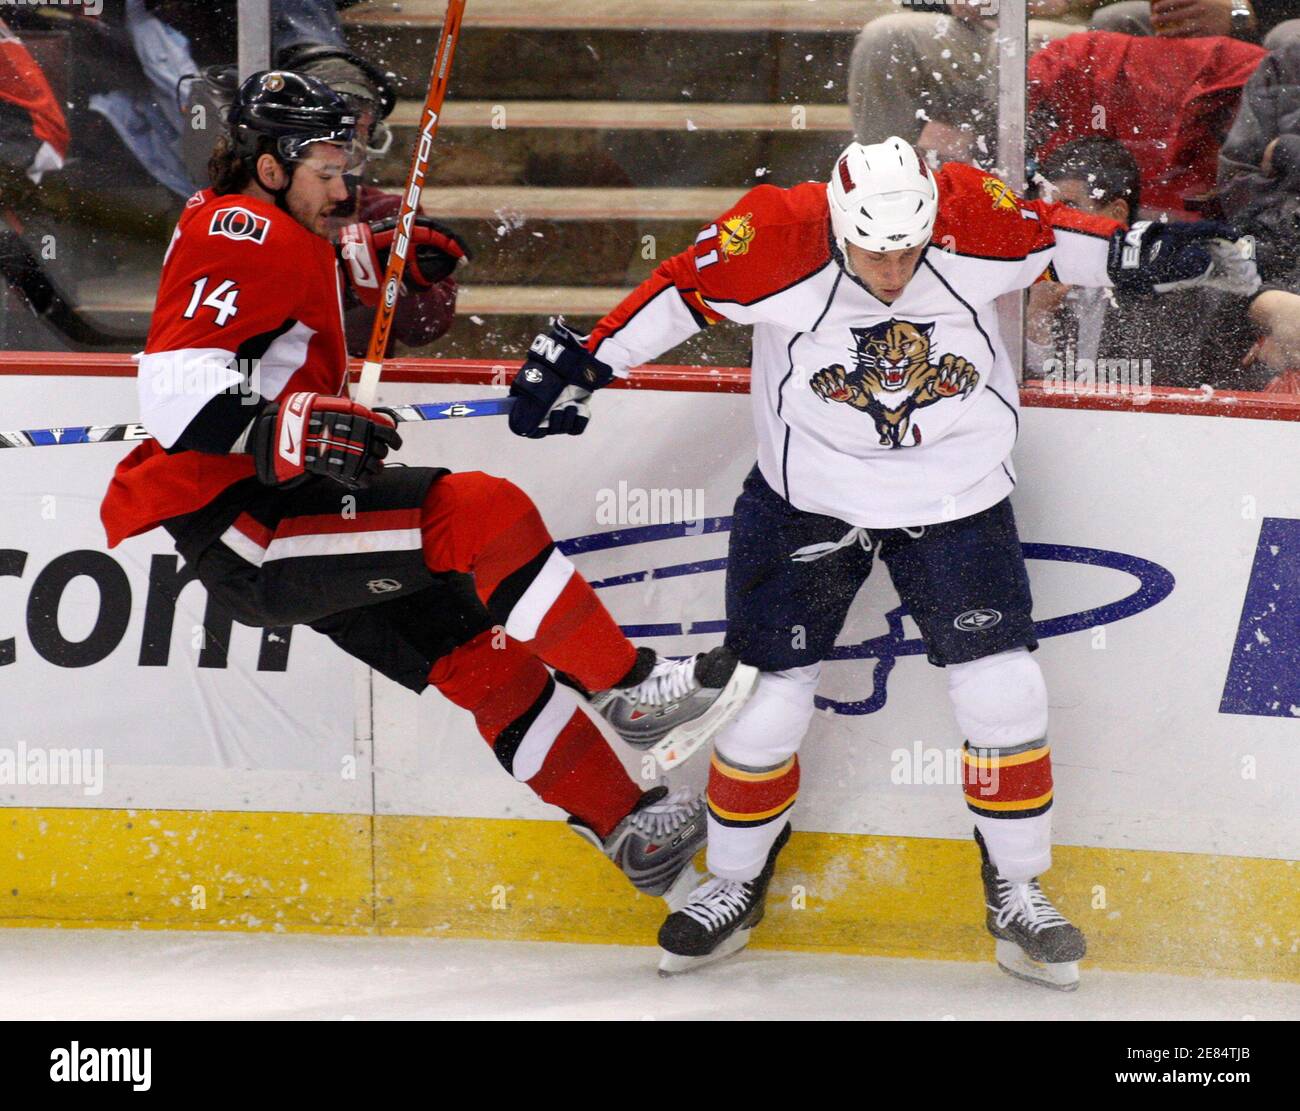 Ottawa Senators Andrej Meszaros (L) collides with Florida Panthers Gregory Campbell during the first period of their NHL hockey game in Ottawa February 7, 2008.       REUTERS/Chris Wattie       (CANADA) Stock Photo